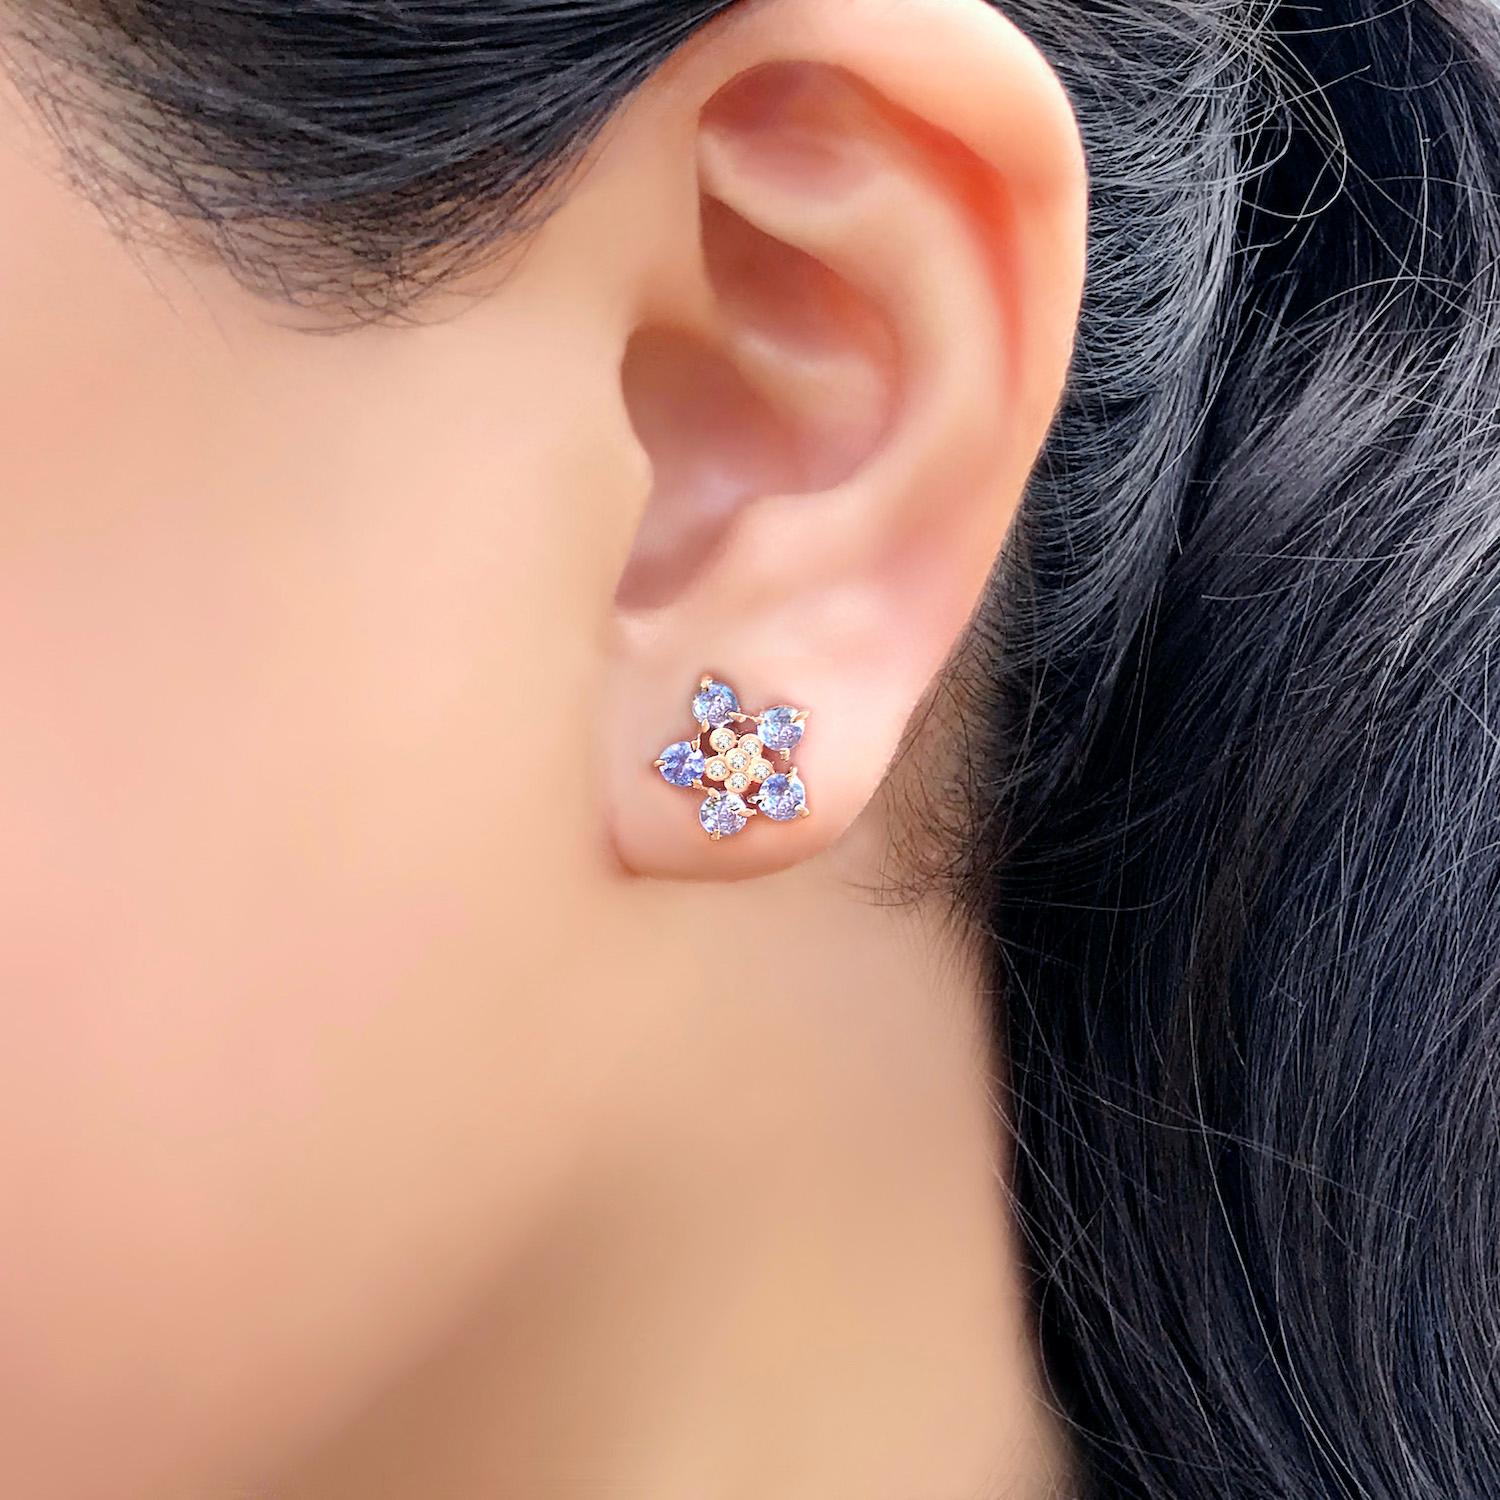 The Forget-Me-Not Tanzanite flower studs with tanzanites and diamonds define effortless and playful elegance with handcraft charisma. This pair each features 5 round 3mm prong set Tanzanite in sparkly purple surrounding 6 round 1mm bezel set